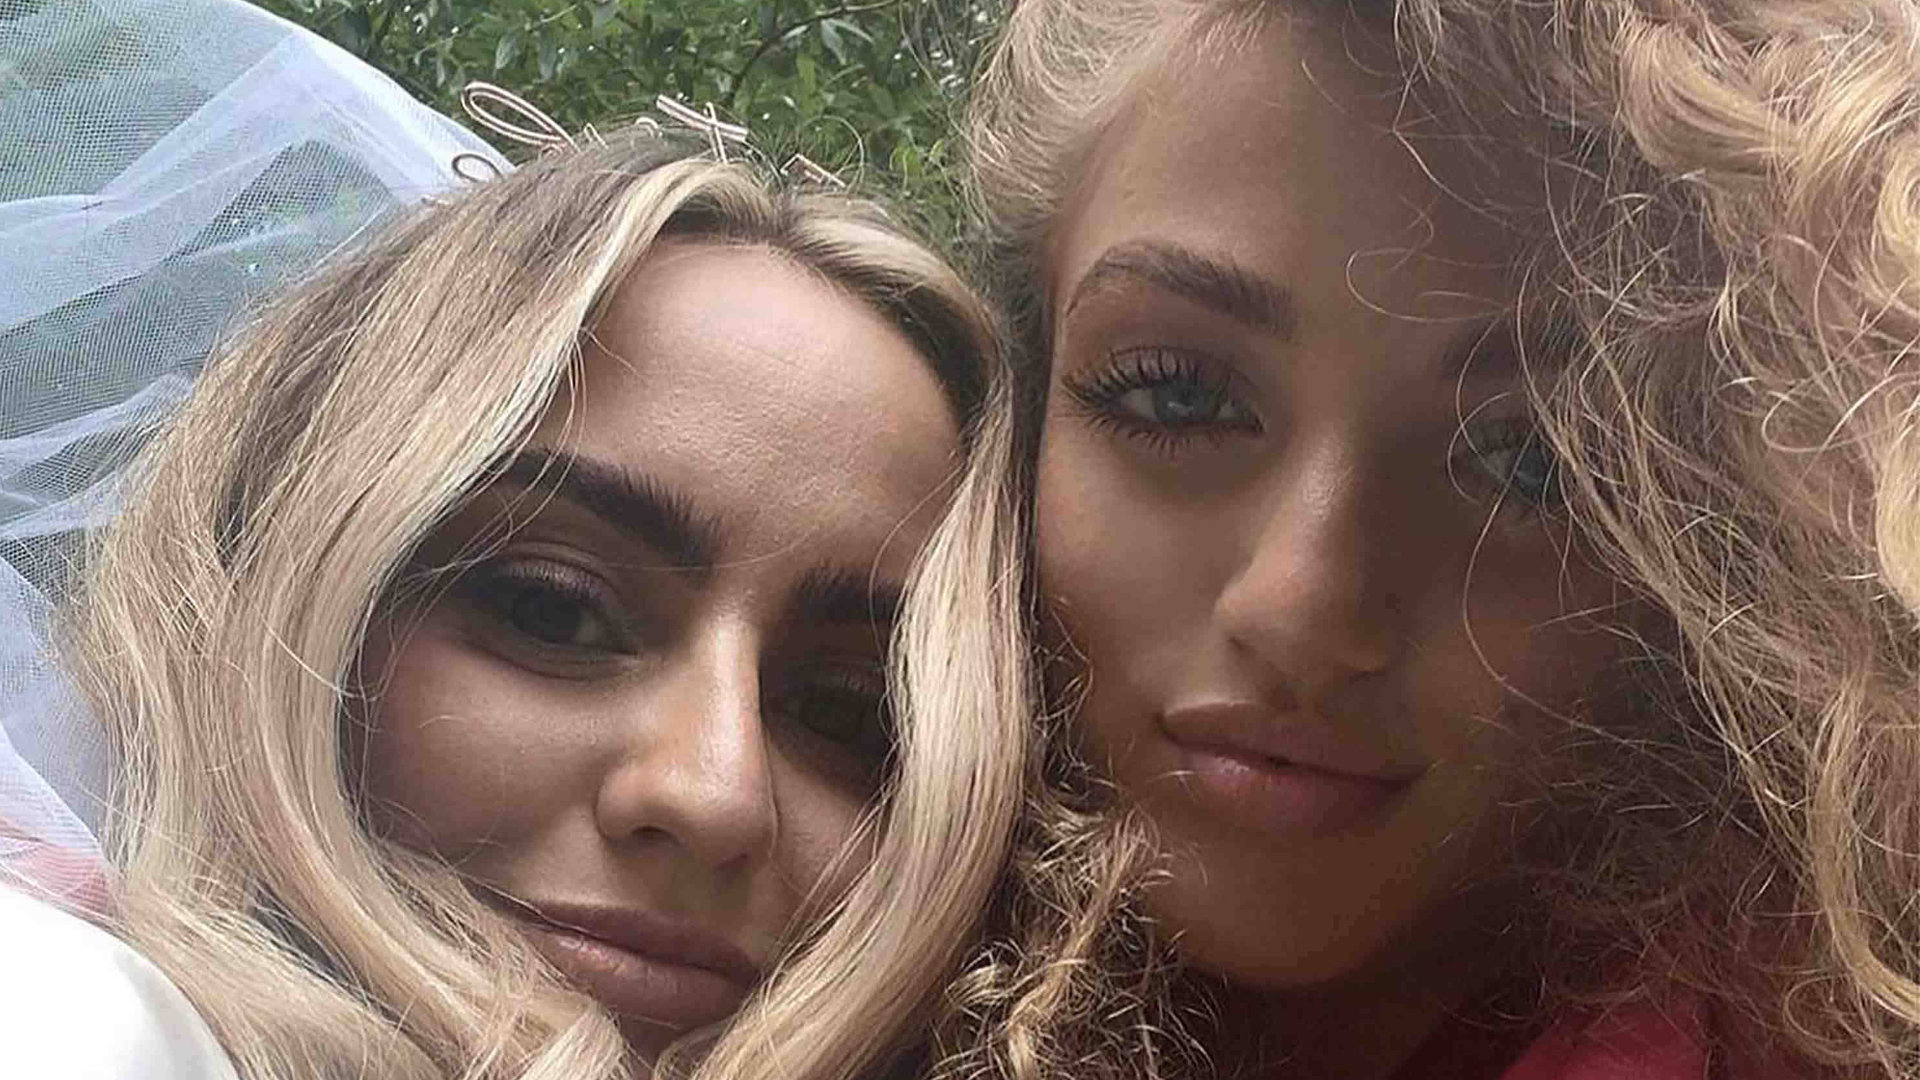 Katie Price lovers all agree that Princess, Katie’s sister and Sophie are great models for taking selfies